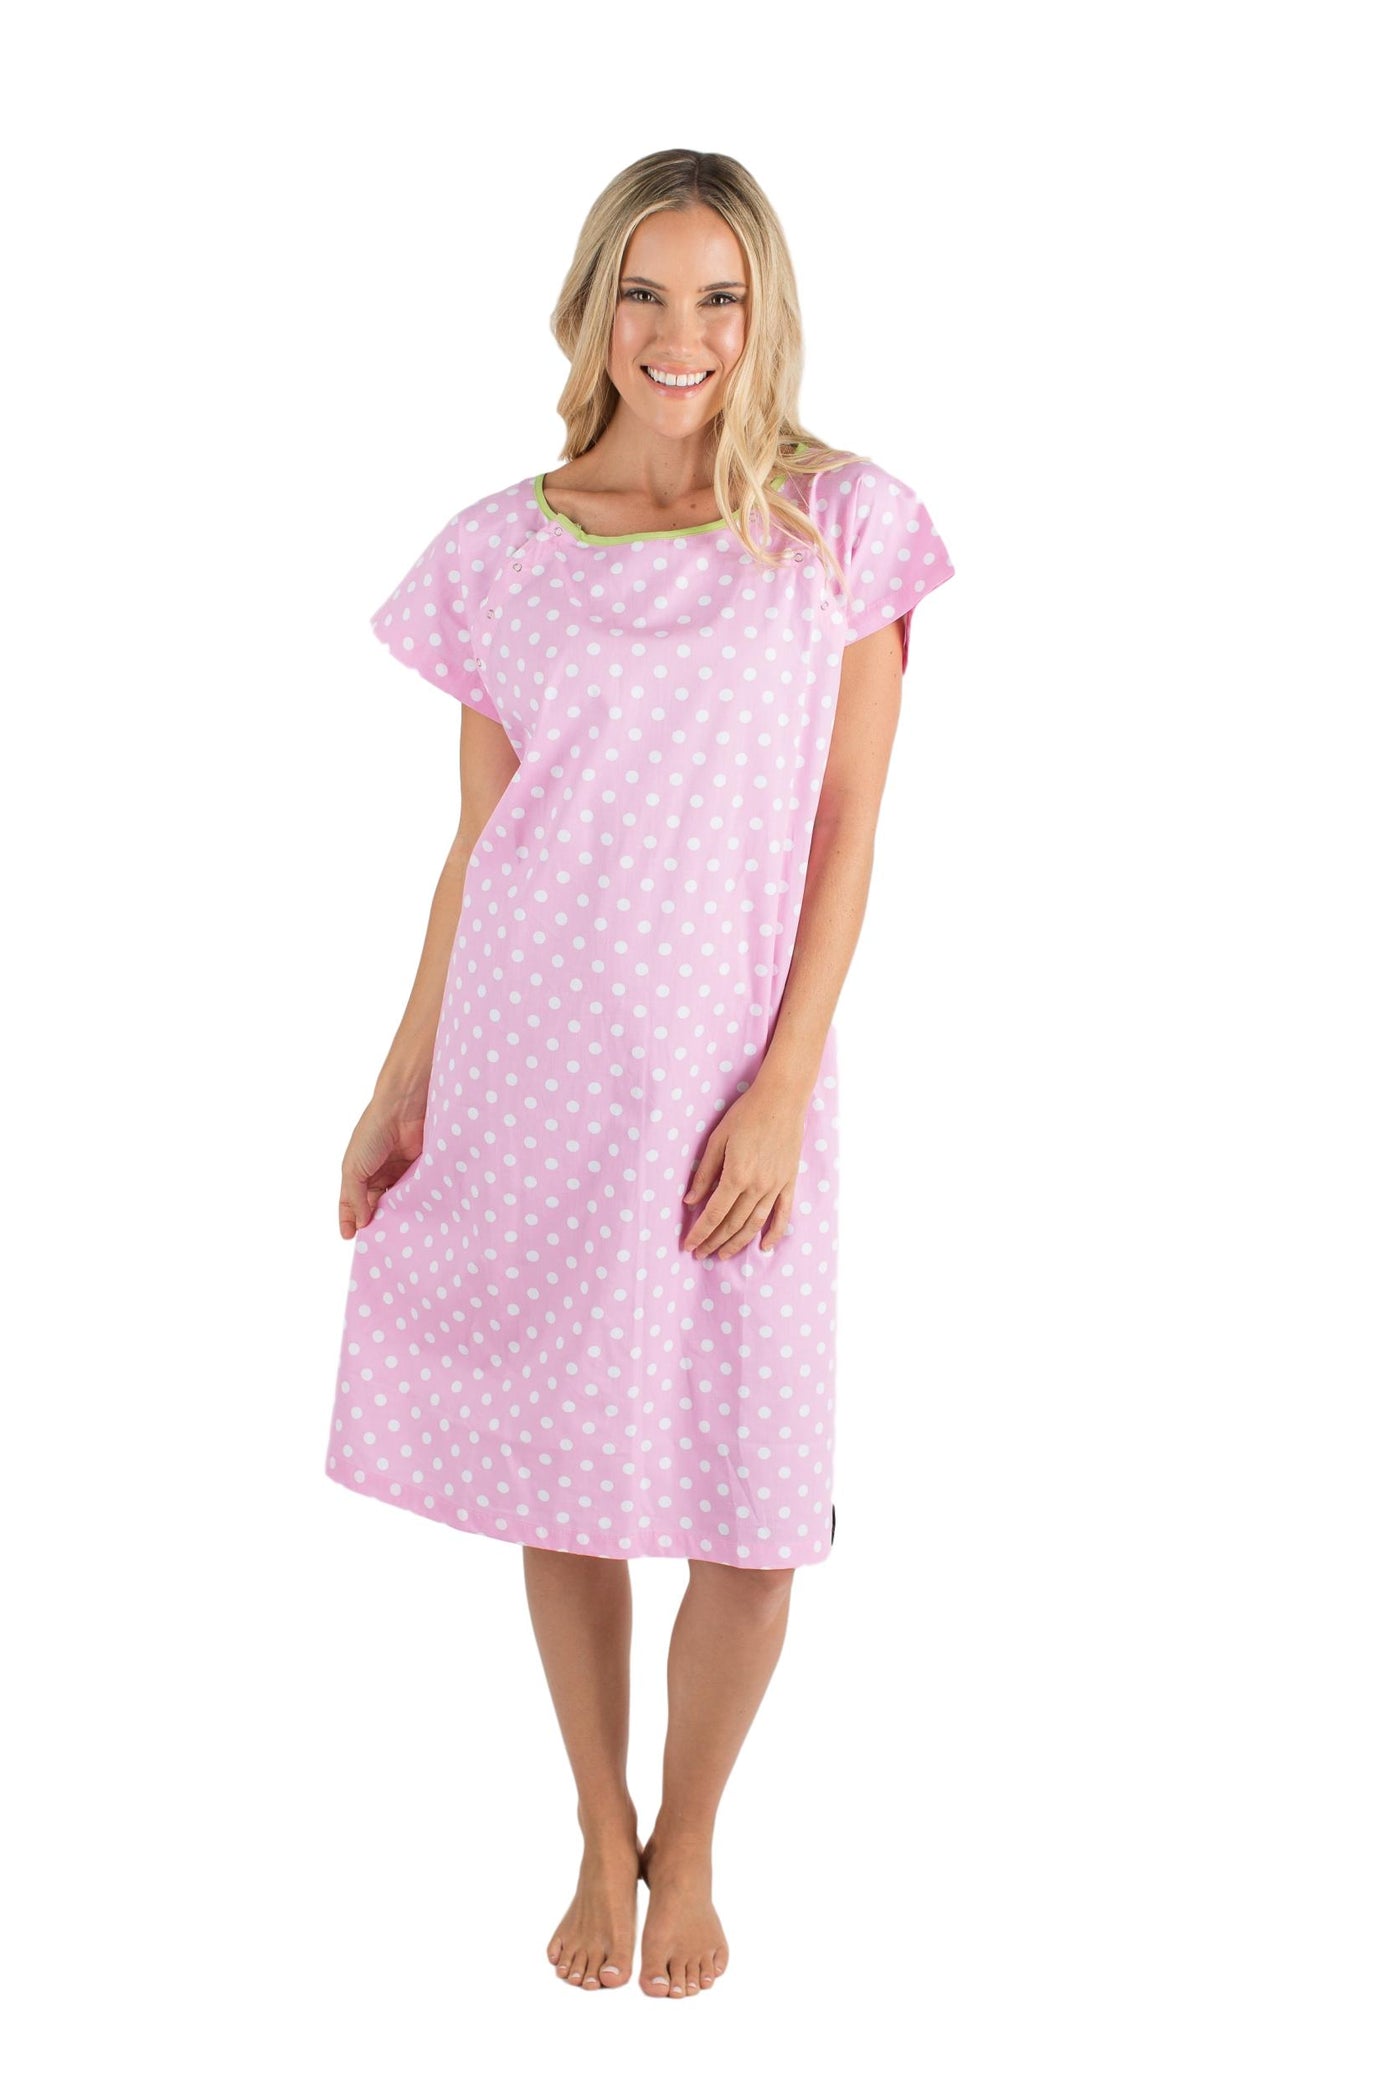 Molly Patient Hospital Gown Gownies